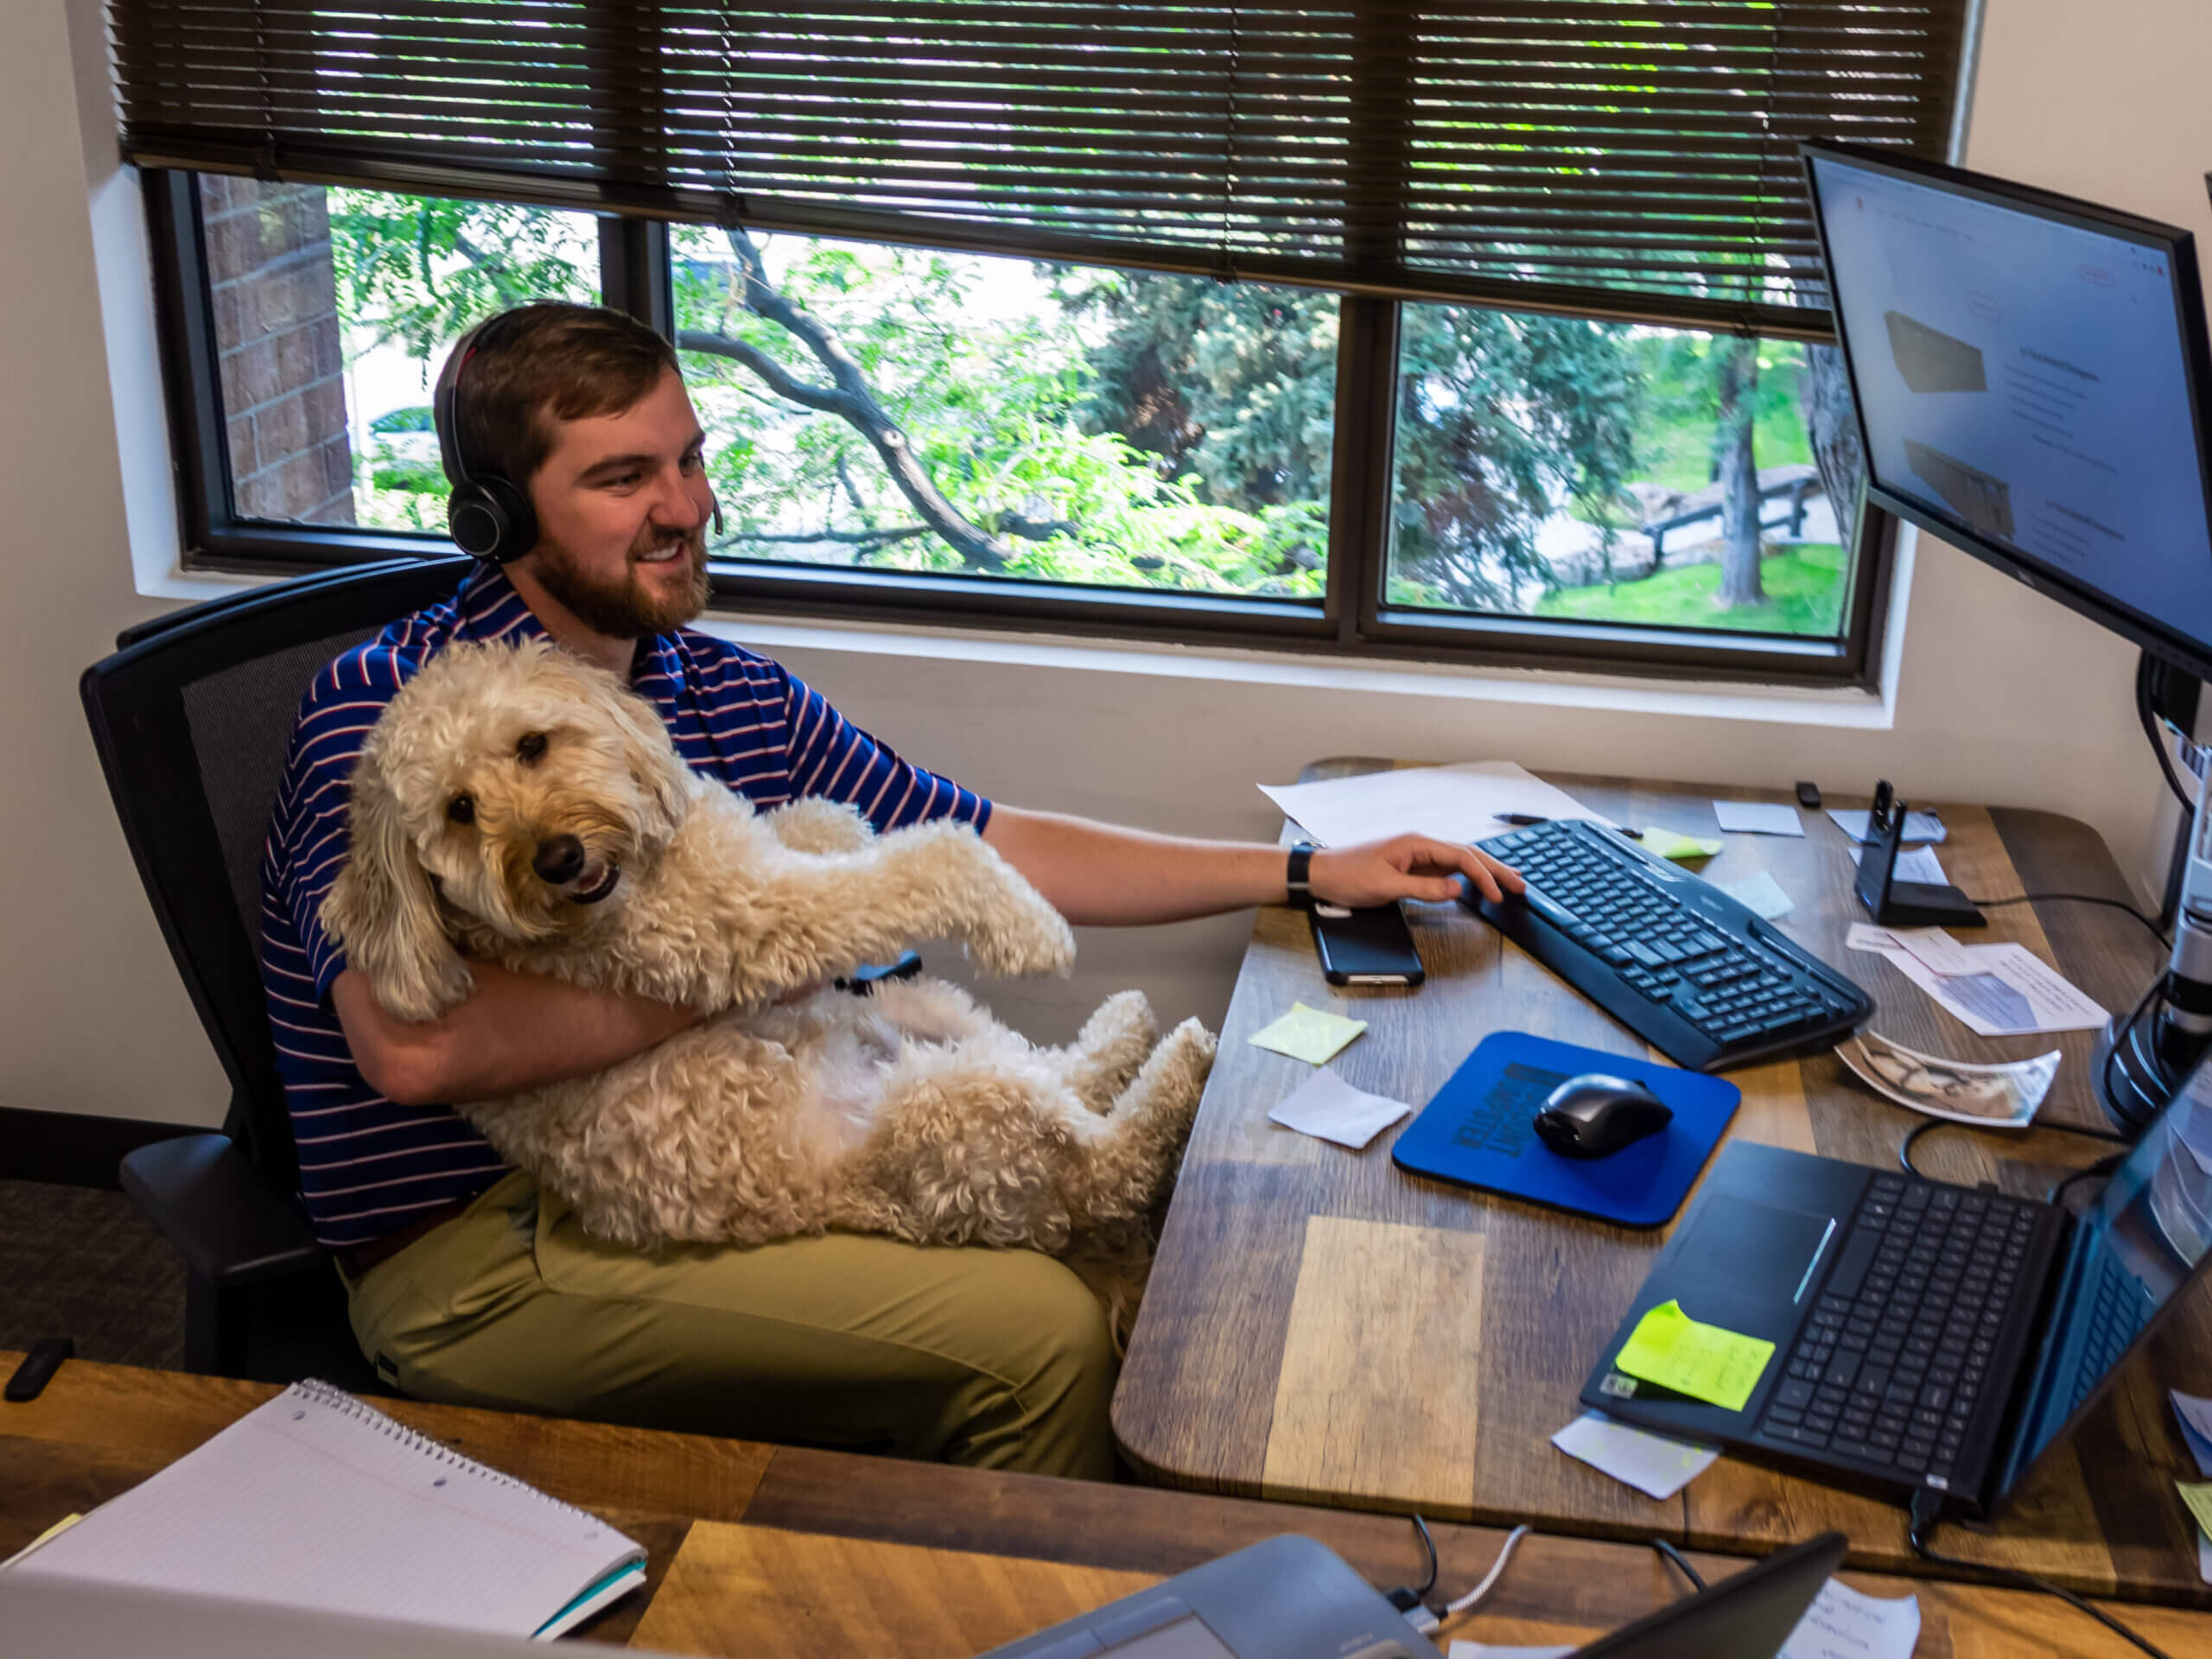 A dumpster rental sales person taking calls with a dog on his lap